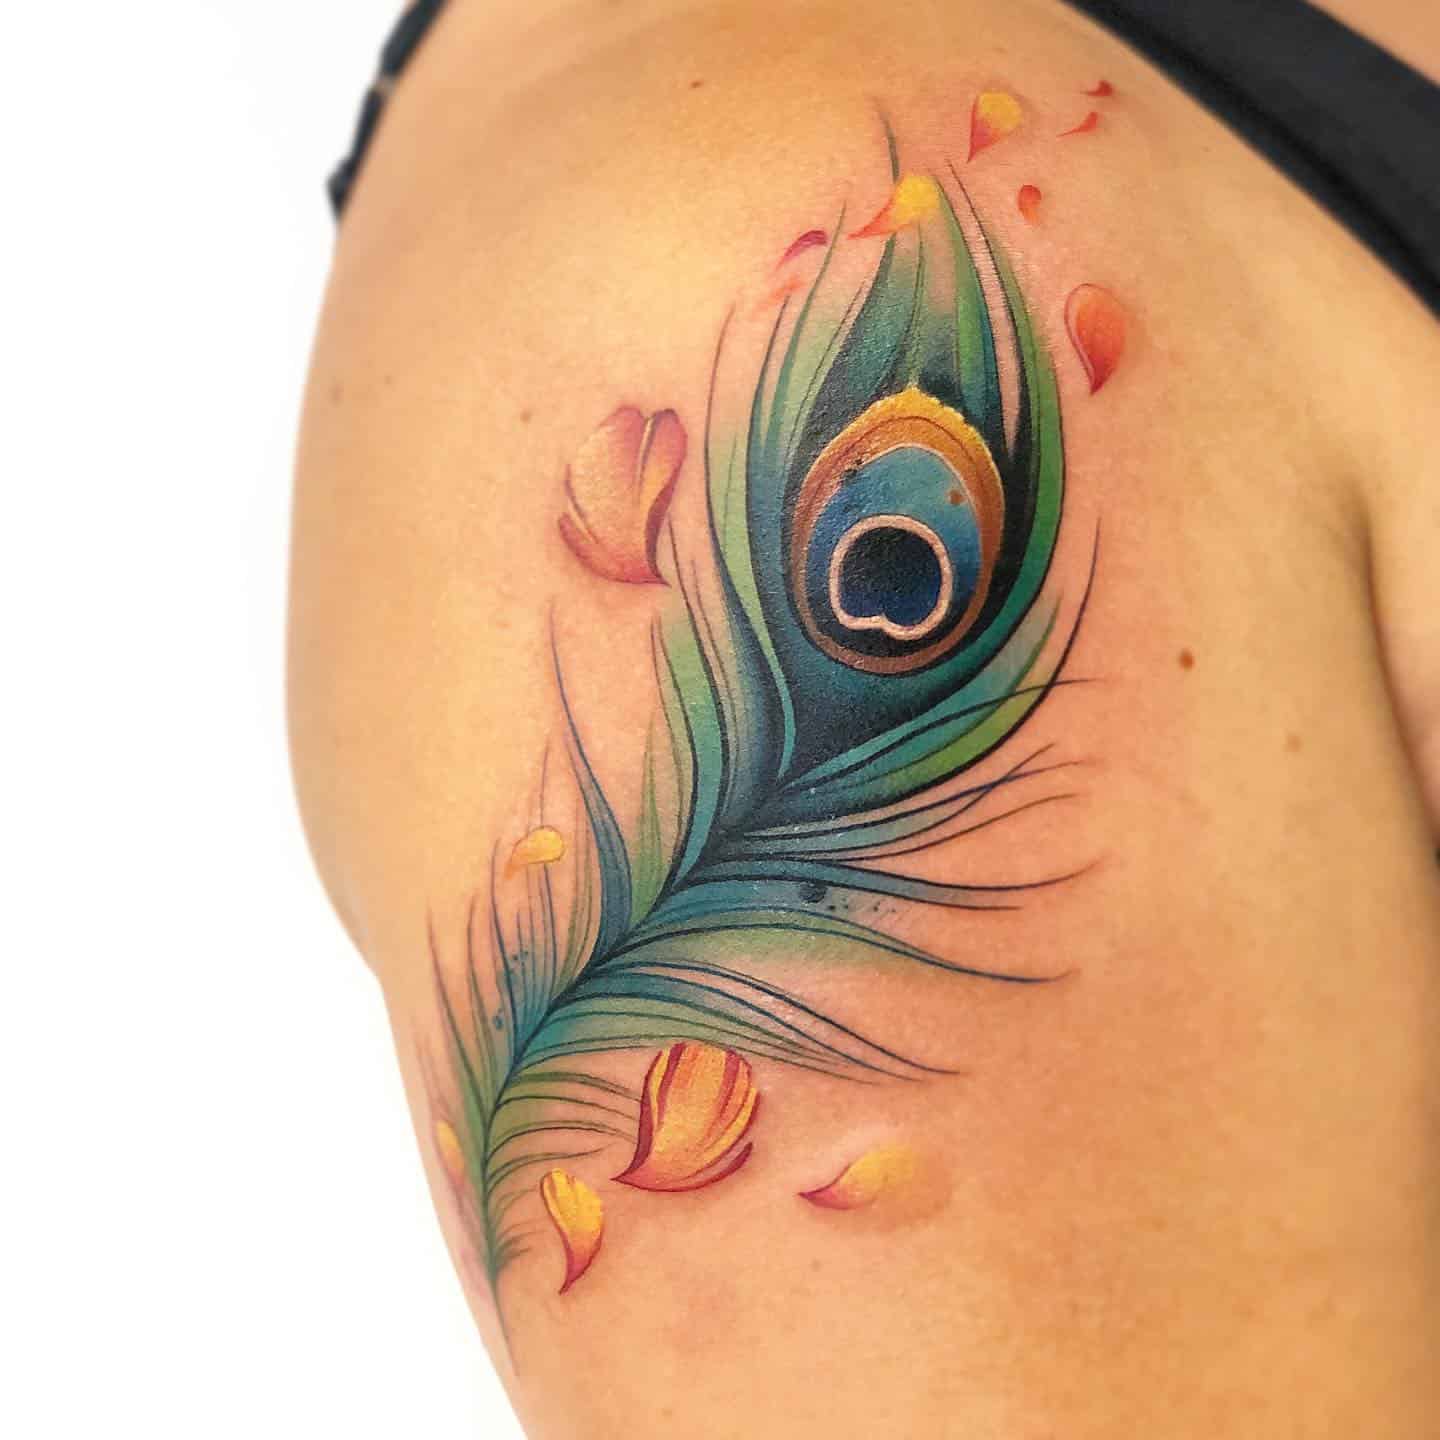 Pretty peacock feather tattoo by Magdalena  Feather tattoo design Peacock  feather tattoo Feather tattoos